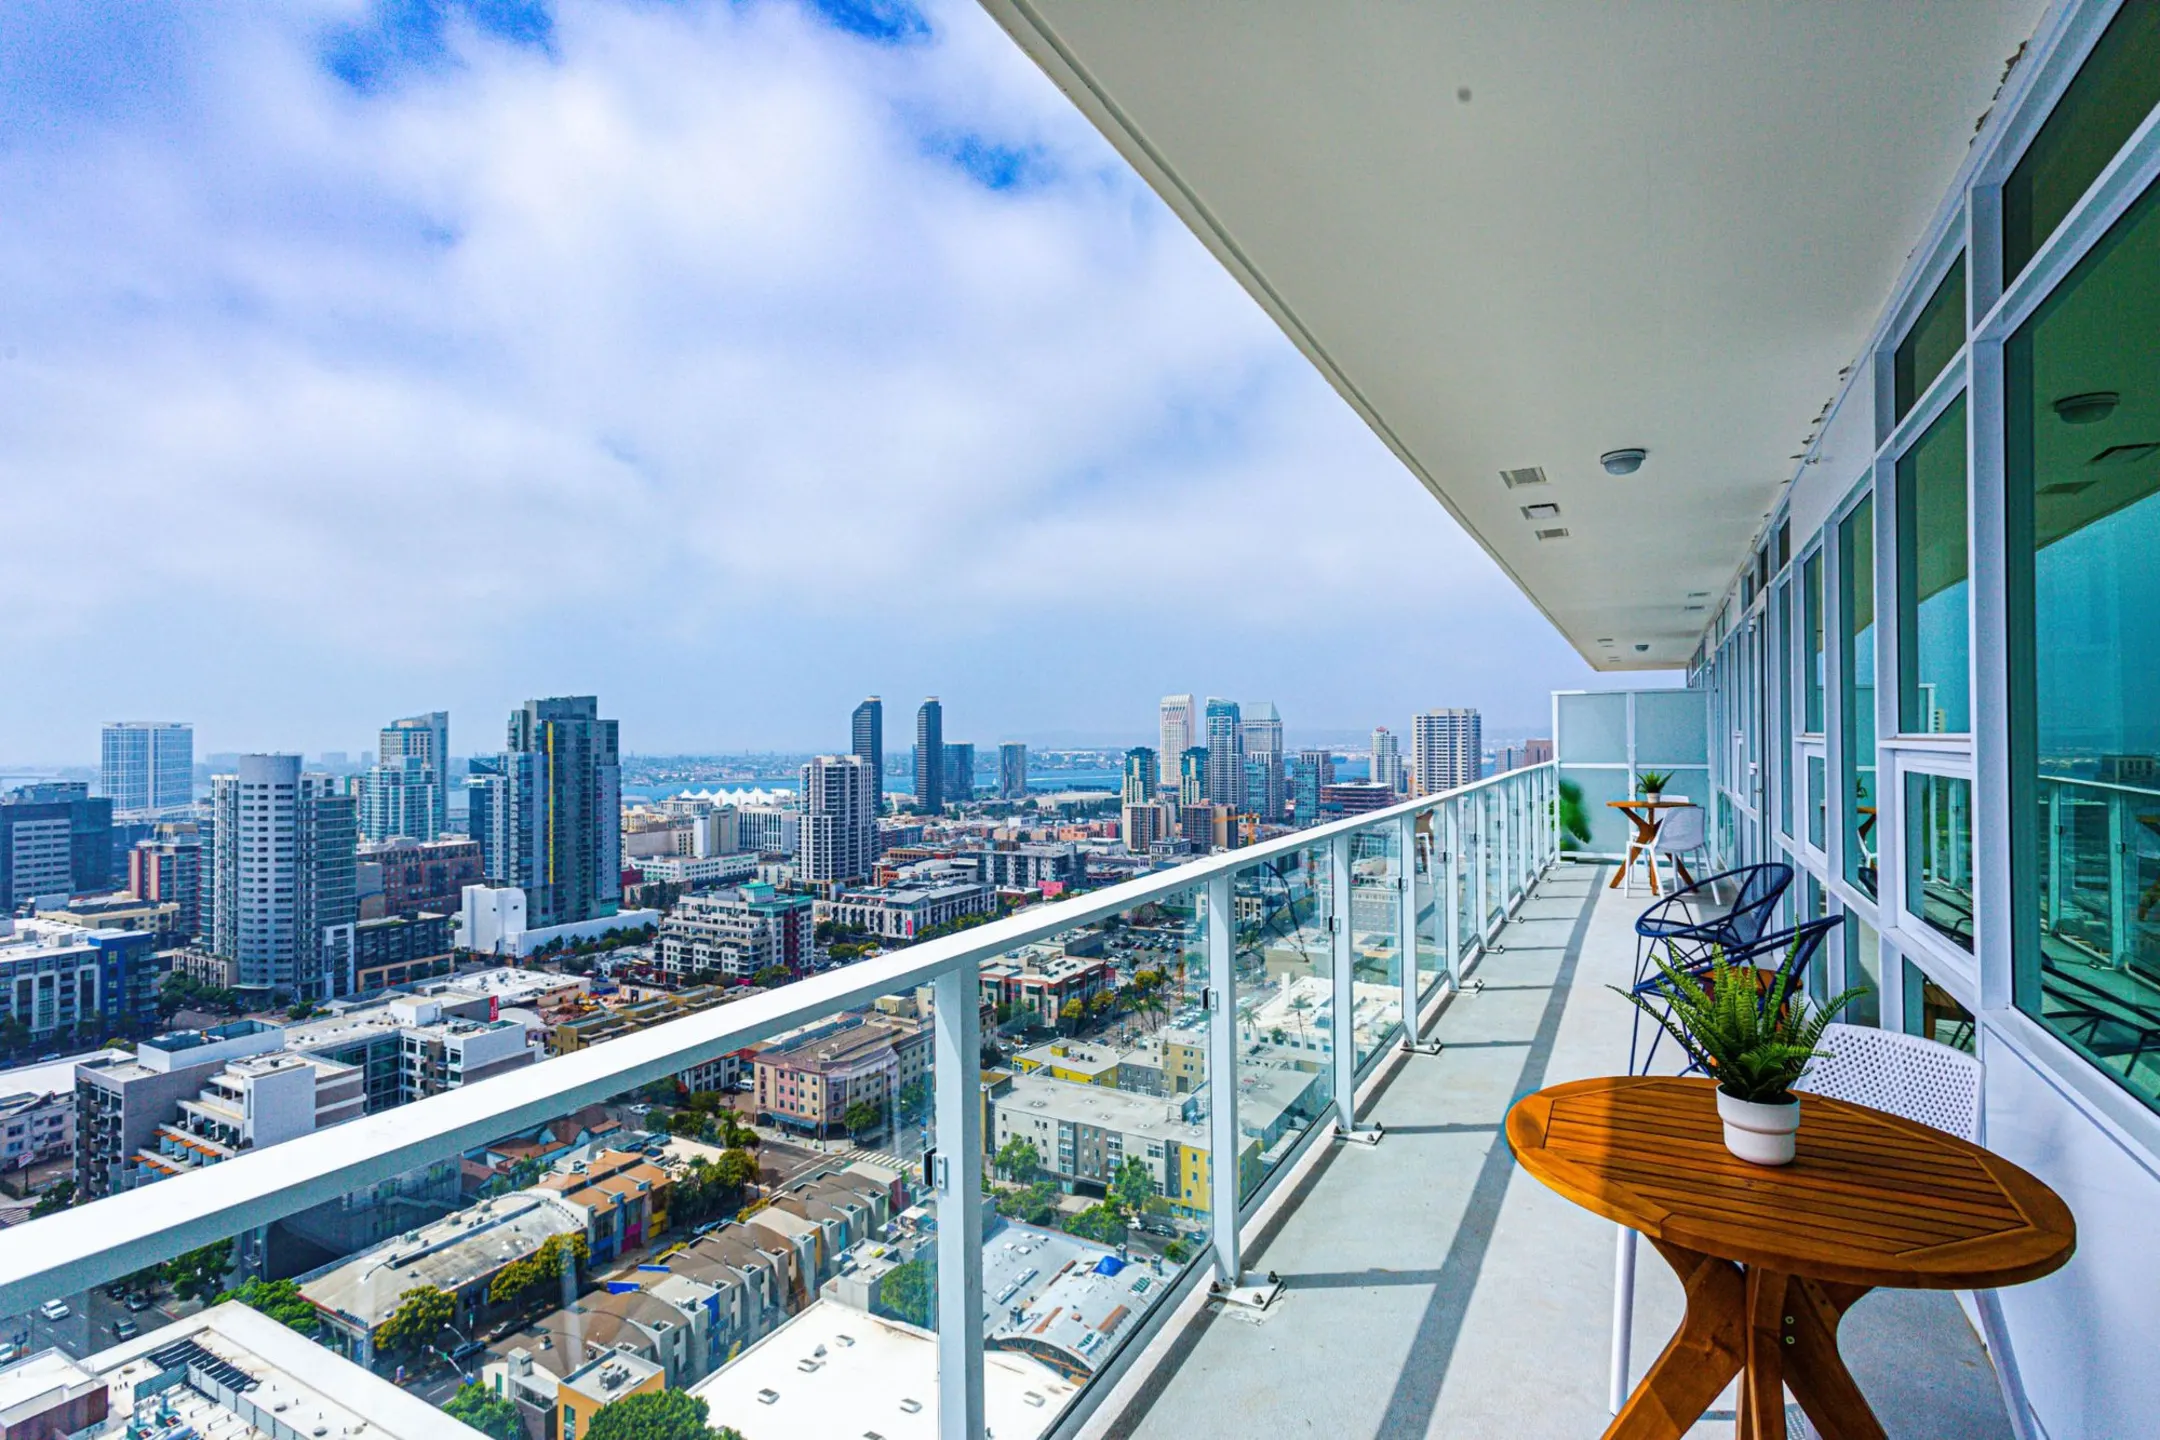 Patio / Deck - The Broadway Towers - San Diego, CA